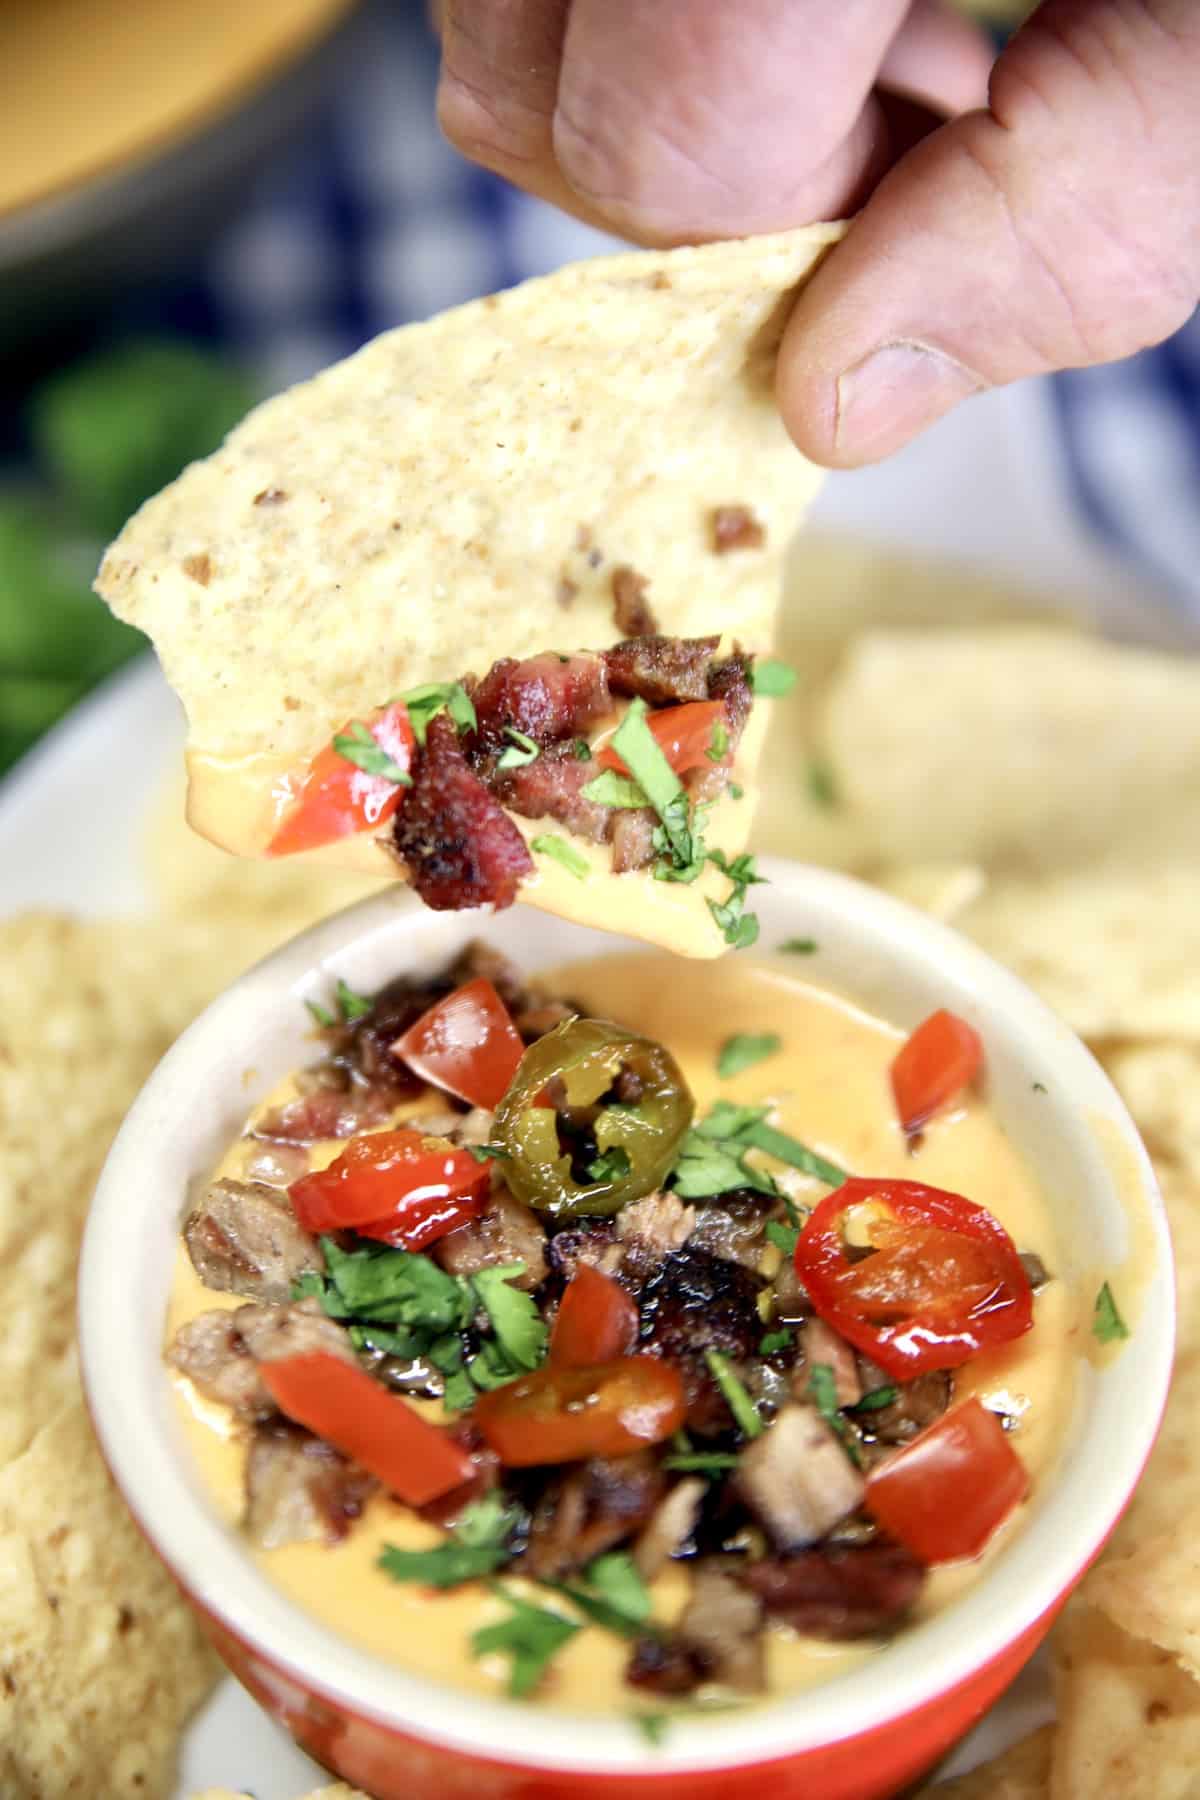 Hand dipping tortilla chip in brisket queso.